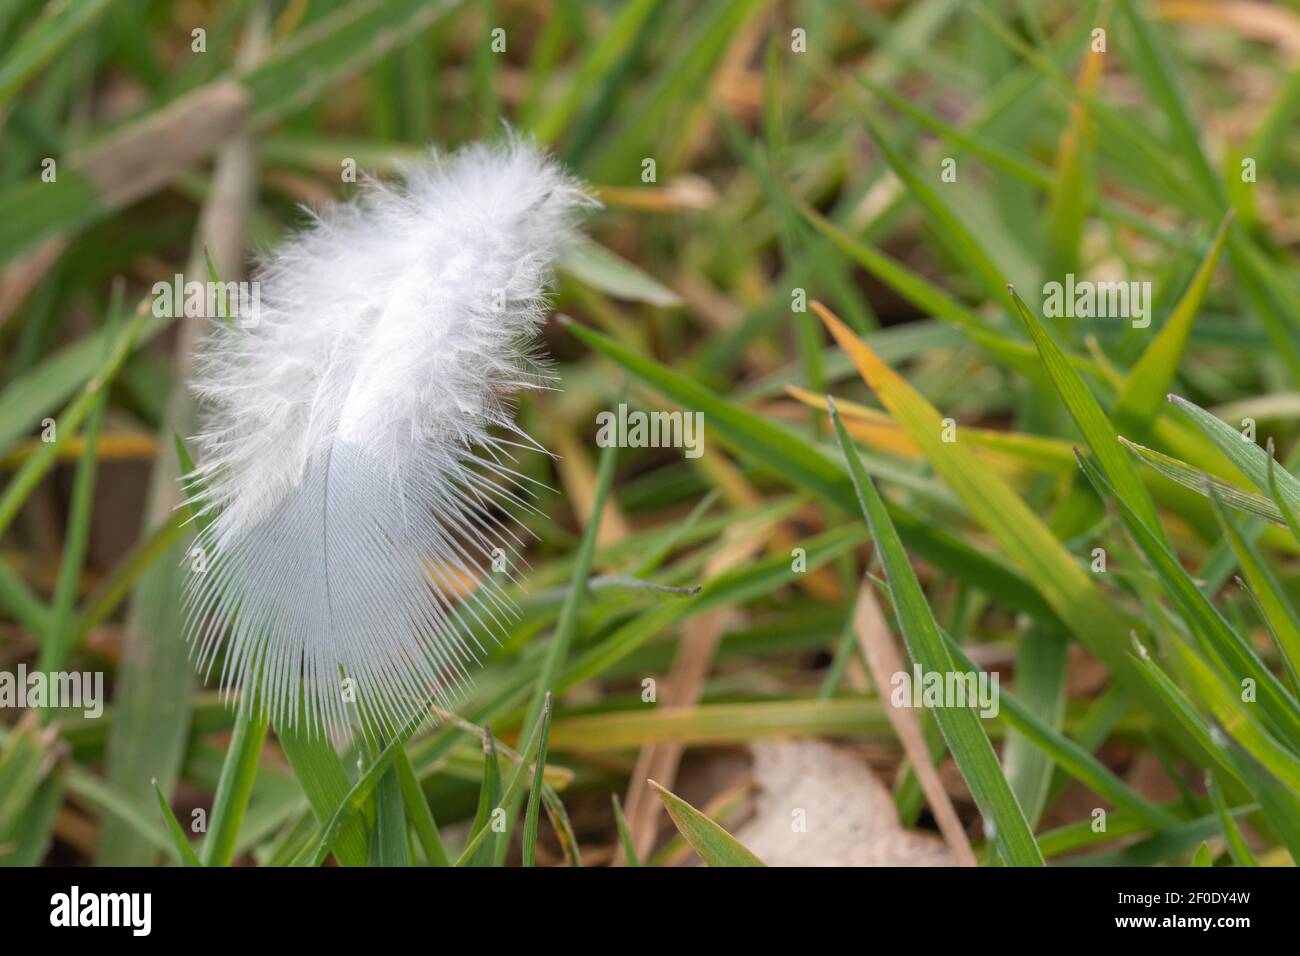 A white feather lies on blades of grass Stock Photo